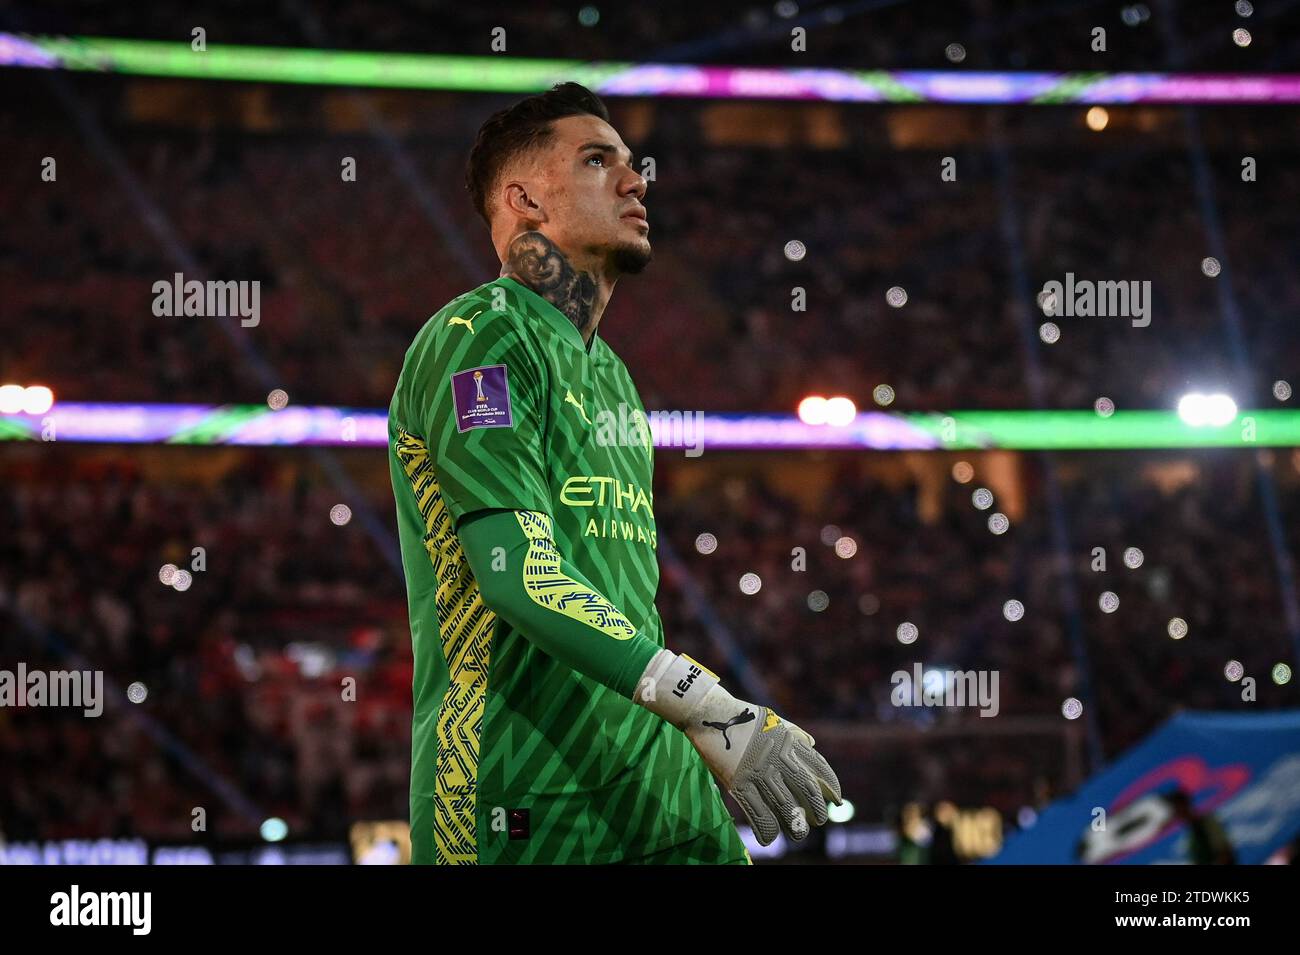 Jeddah, Saudi Arabia. 19th Dec, 2023. King Abdullah Sports City Goalkeeper Ederson Moraes of Manchester City enters field of play before the FIFA Club World Cup Semi Final between Urawa Reds of Japan and Manchester City of England at the King Abdullah Sports City Stadium in Jeddah, Saudi Arabia. City won the game 3-0 and will play Fluminense of Brazil in the final on Friday. (Alexandre Neto/SPP) Credit: SPP Sport Press Photo. /Alamy Live News Stock Photo